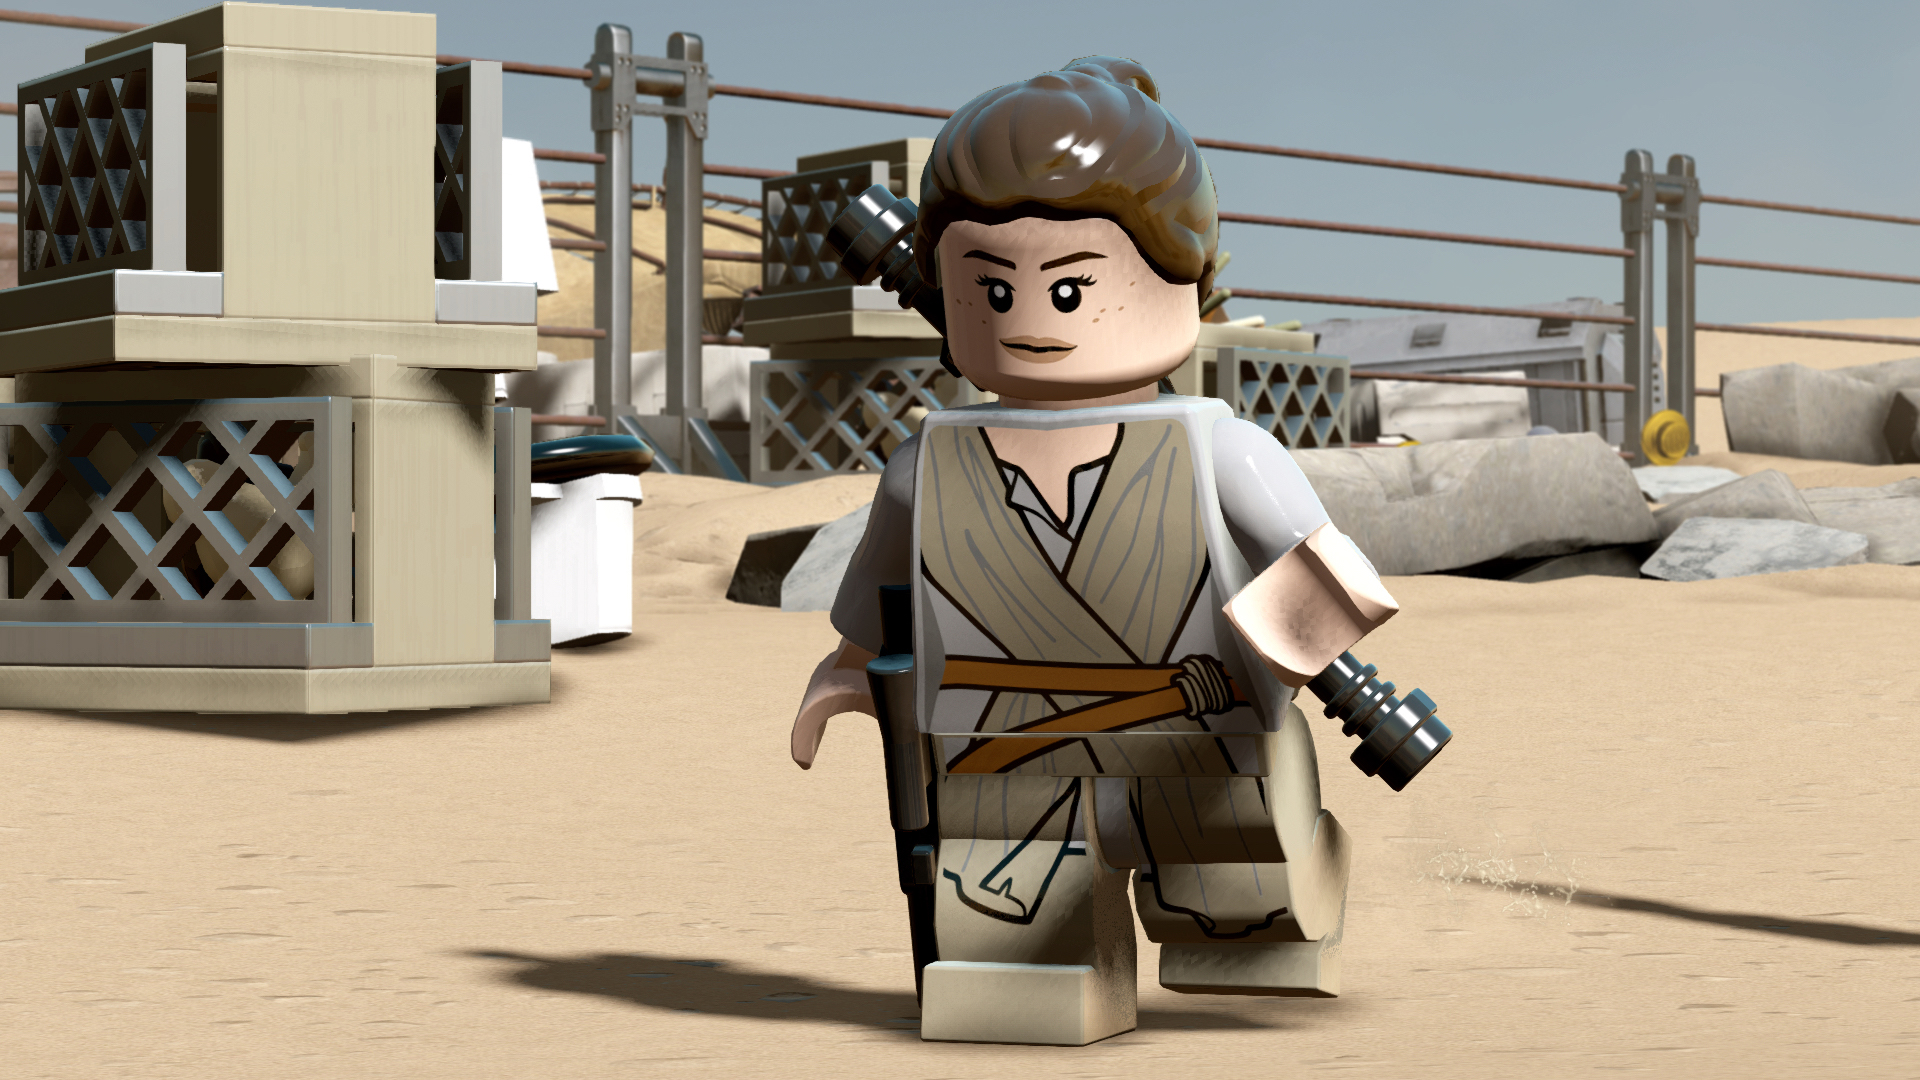 lego-star-wars-the-force-awakens-is-coming-to-expand-the-universe-player-hud